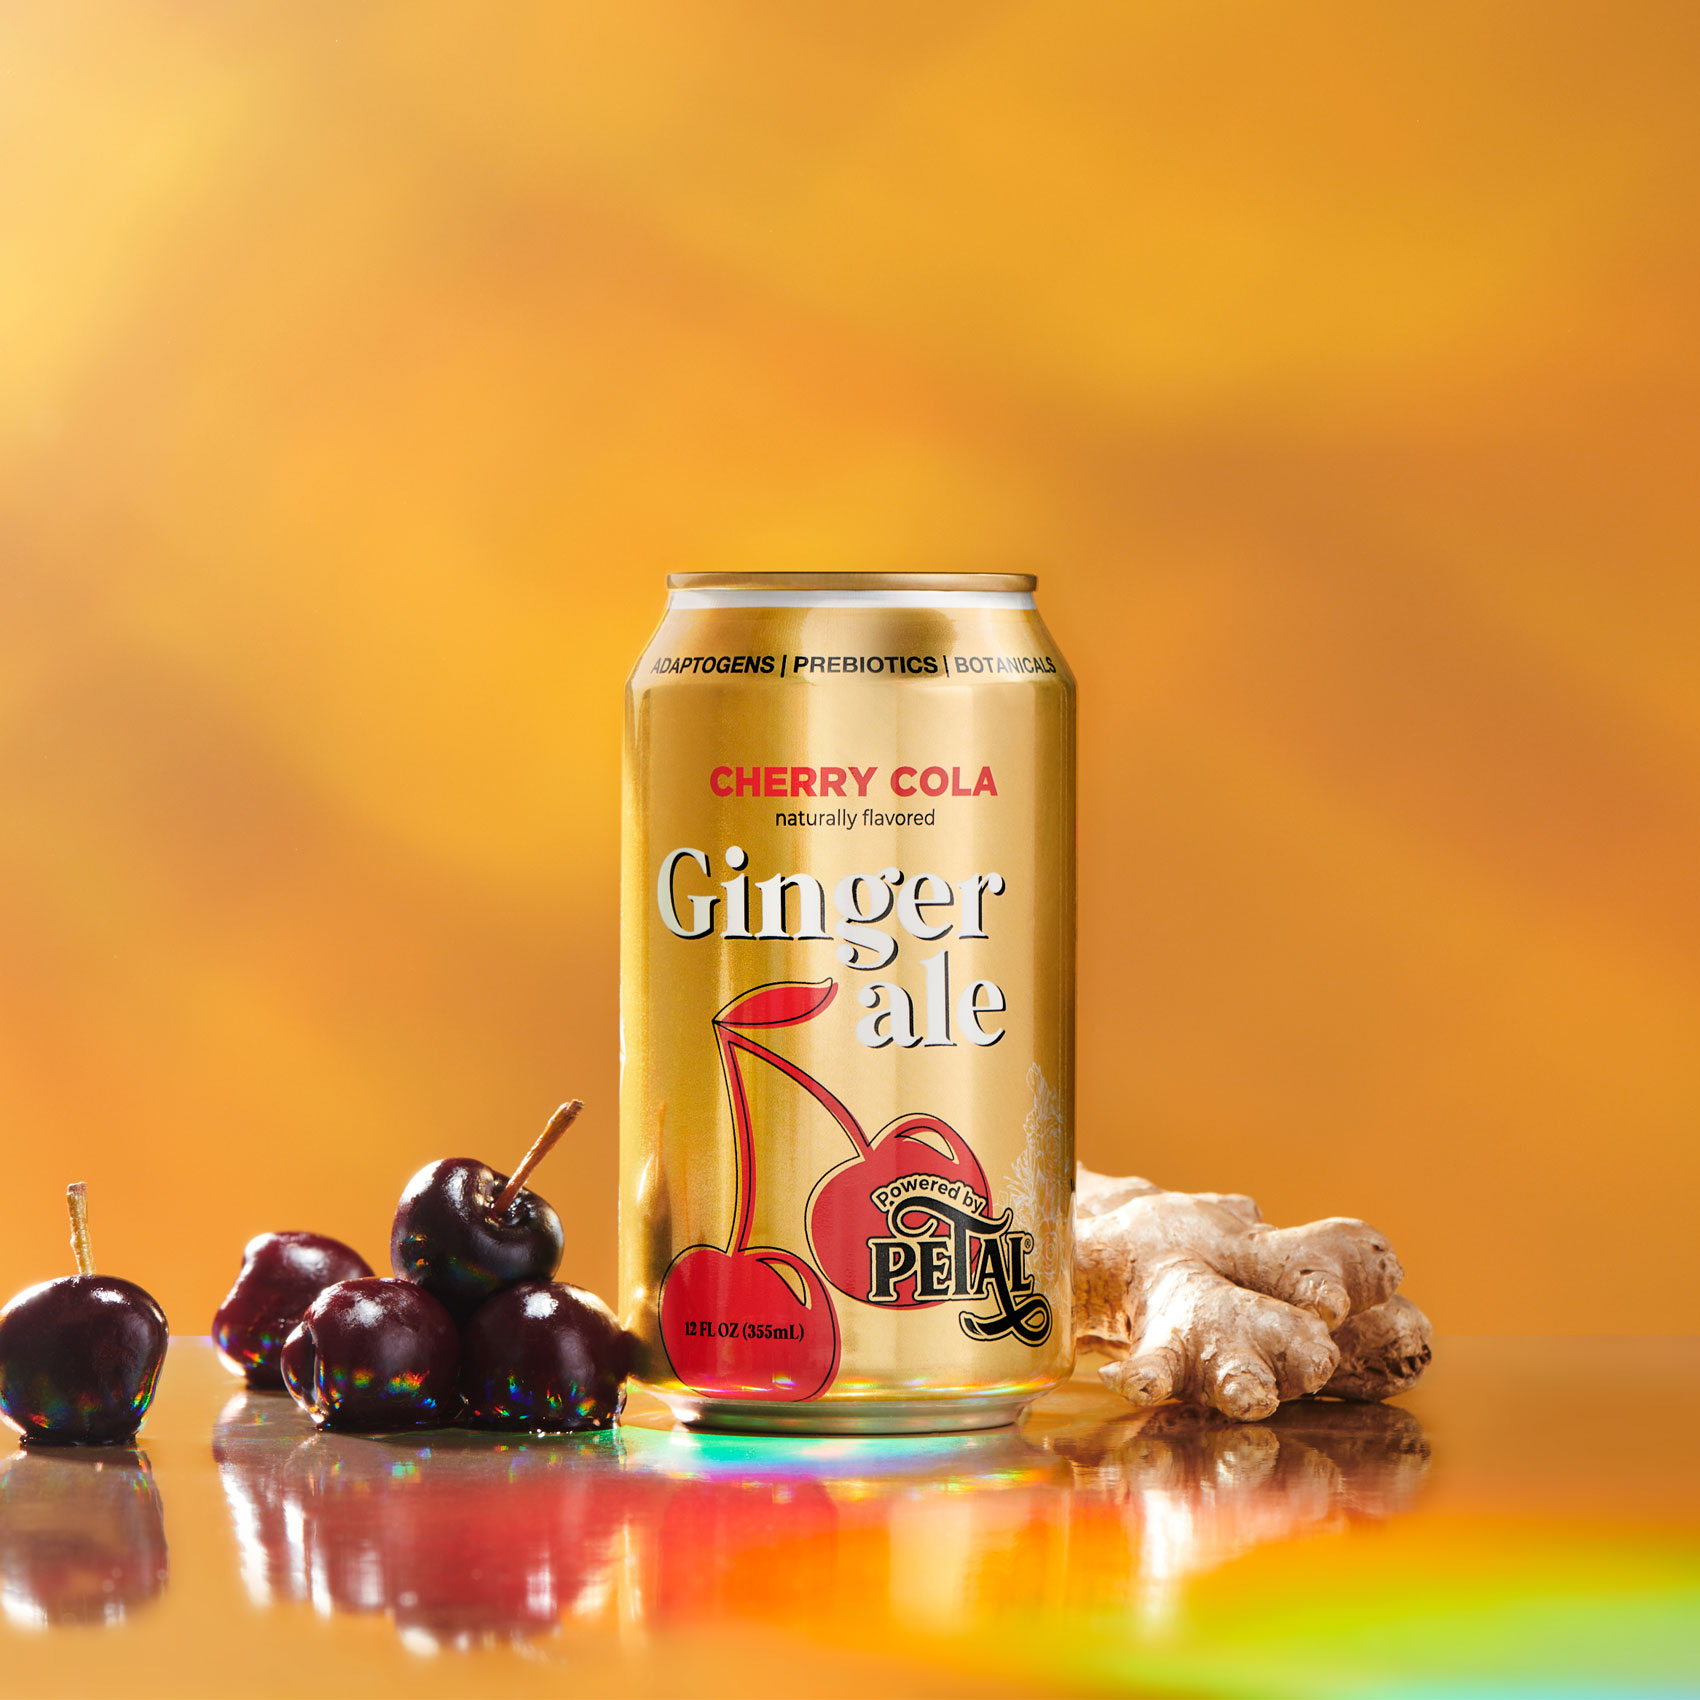 Can of cherry cola ginger ale